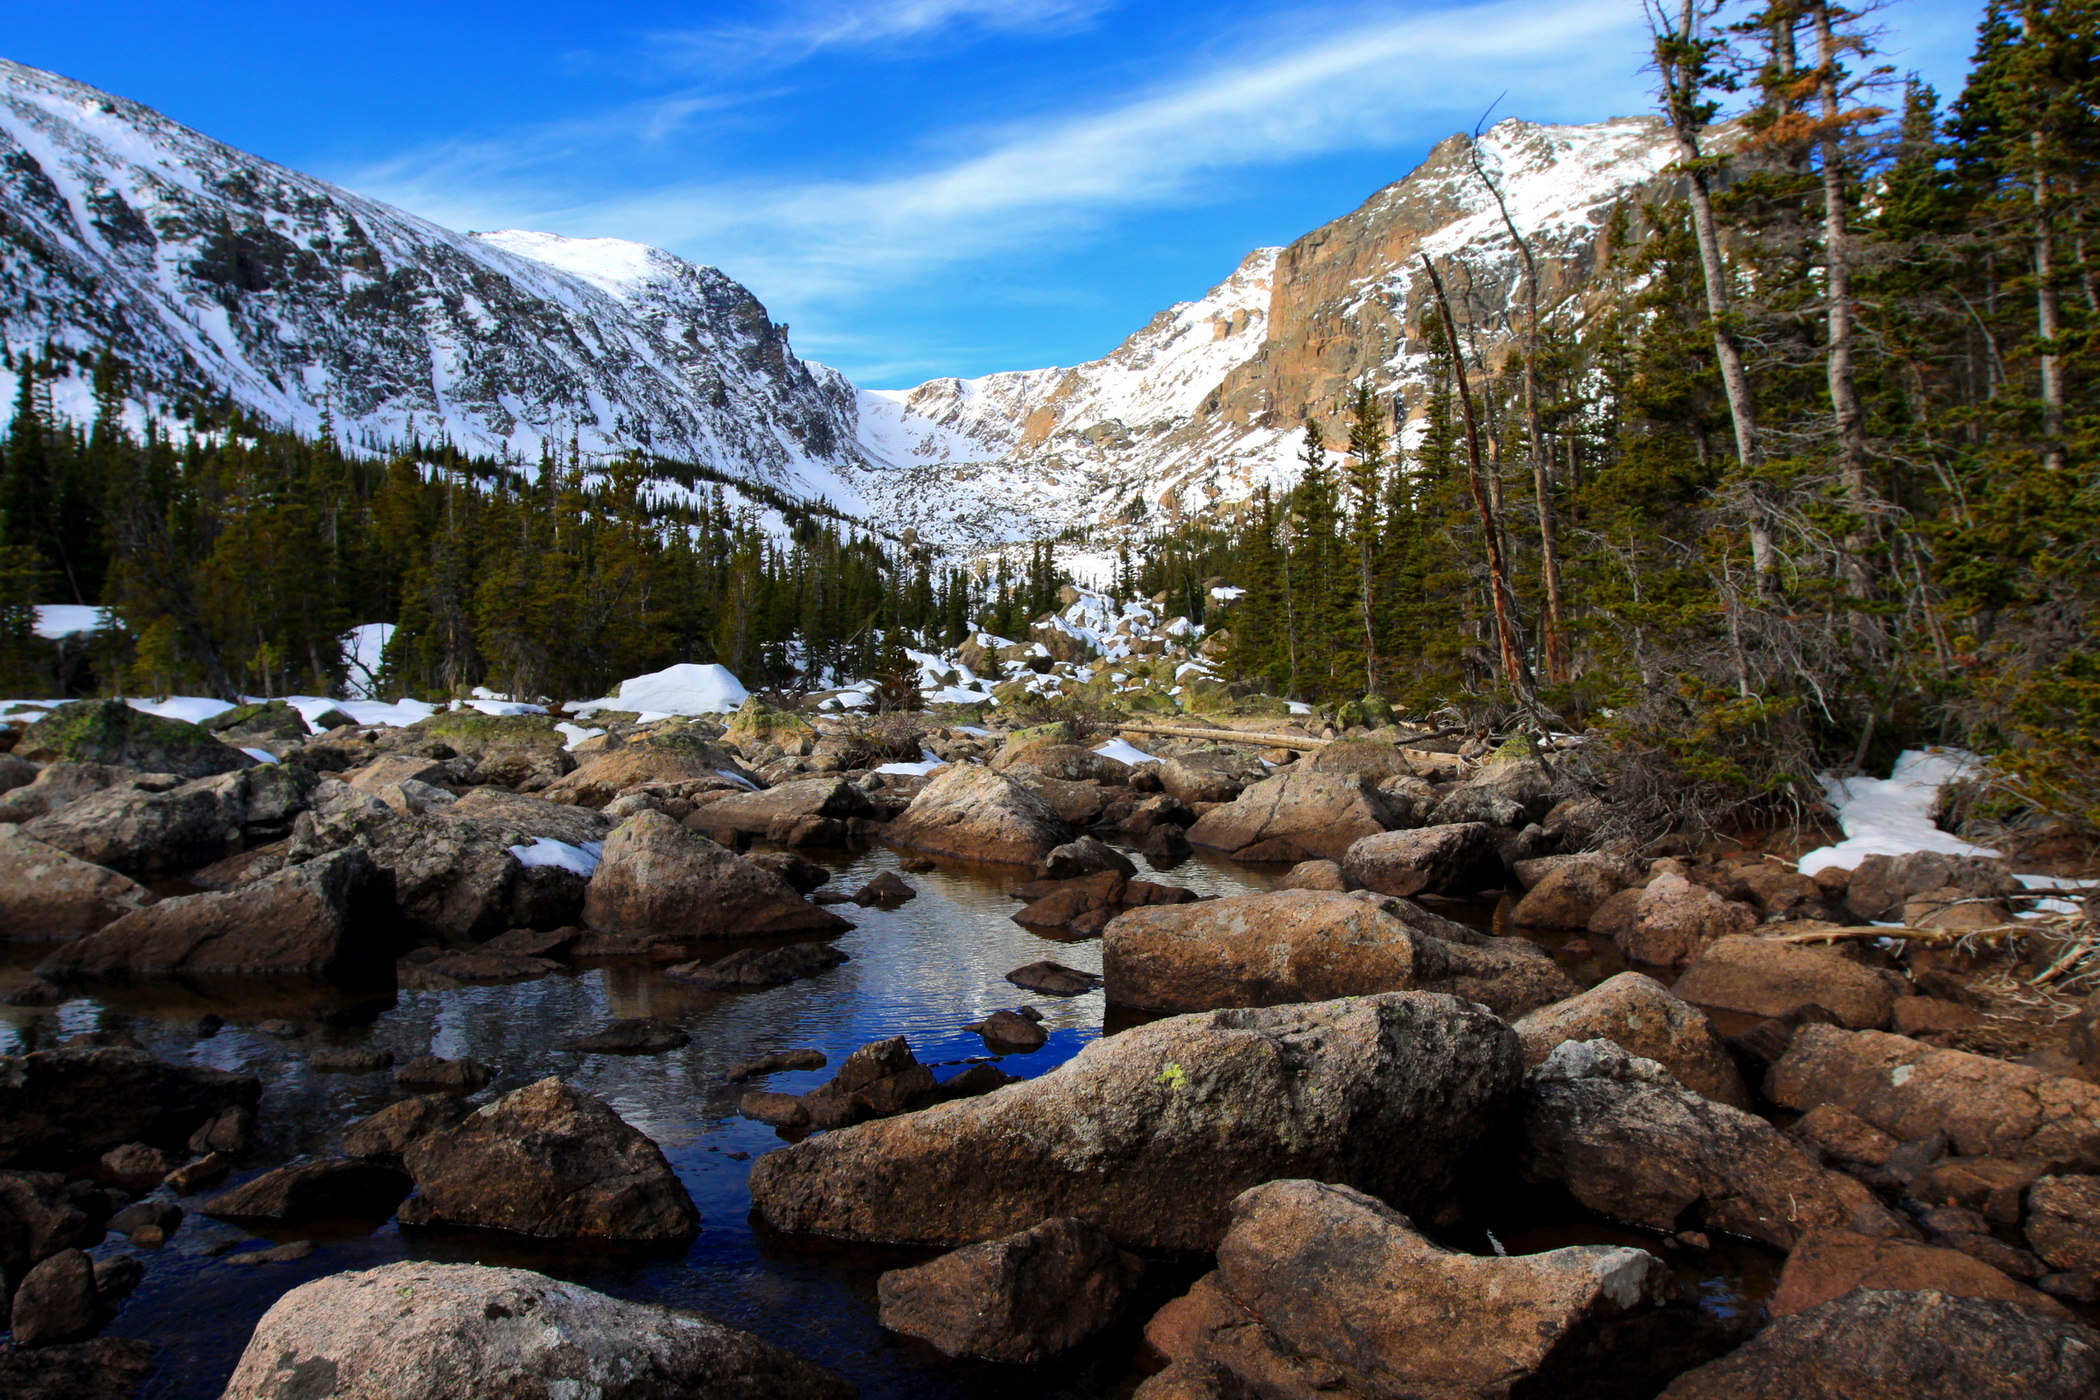  1279kB Outstanding Rocky Mountain wallpaper Landscapes wallpapers 2100x1400